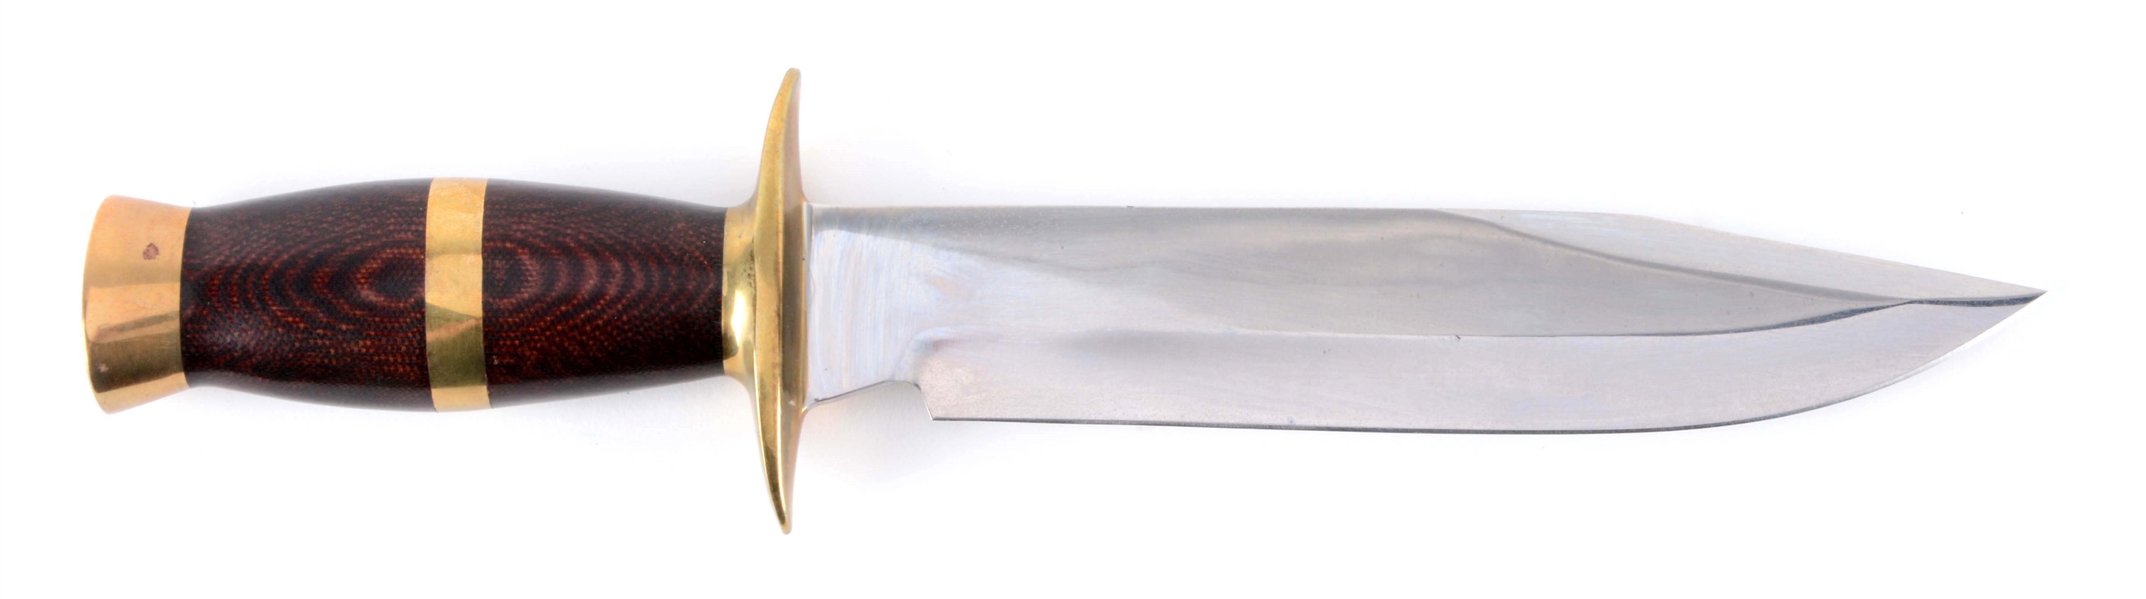 J.N. COOPER FIGHTING KNIFE WITH MICARTA AND BRASS HANDLE.